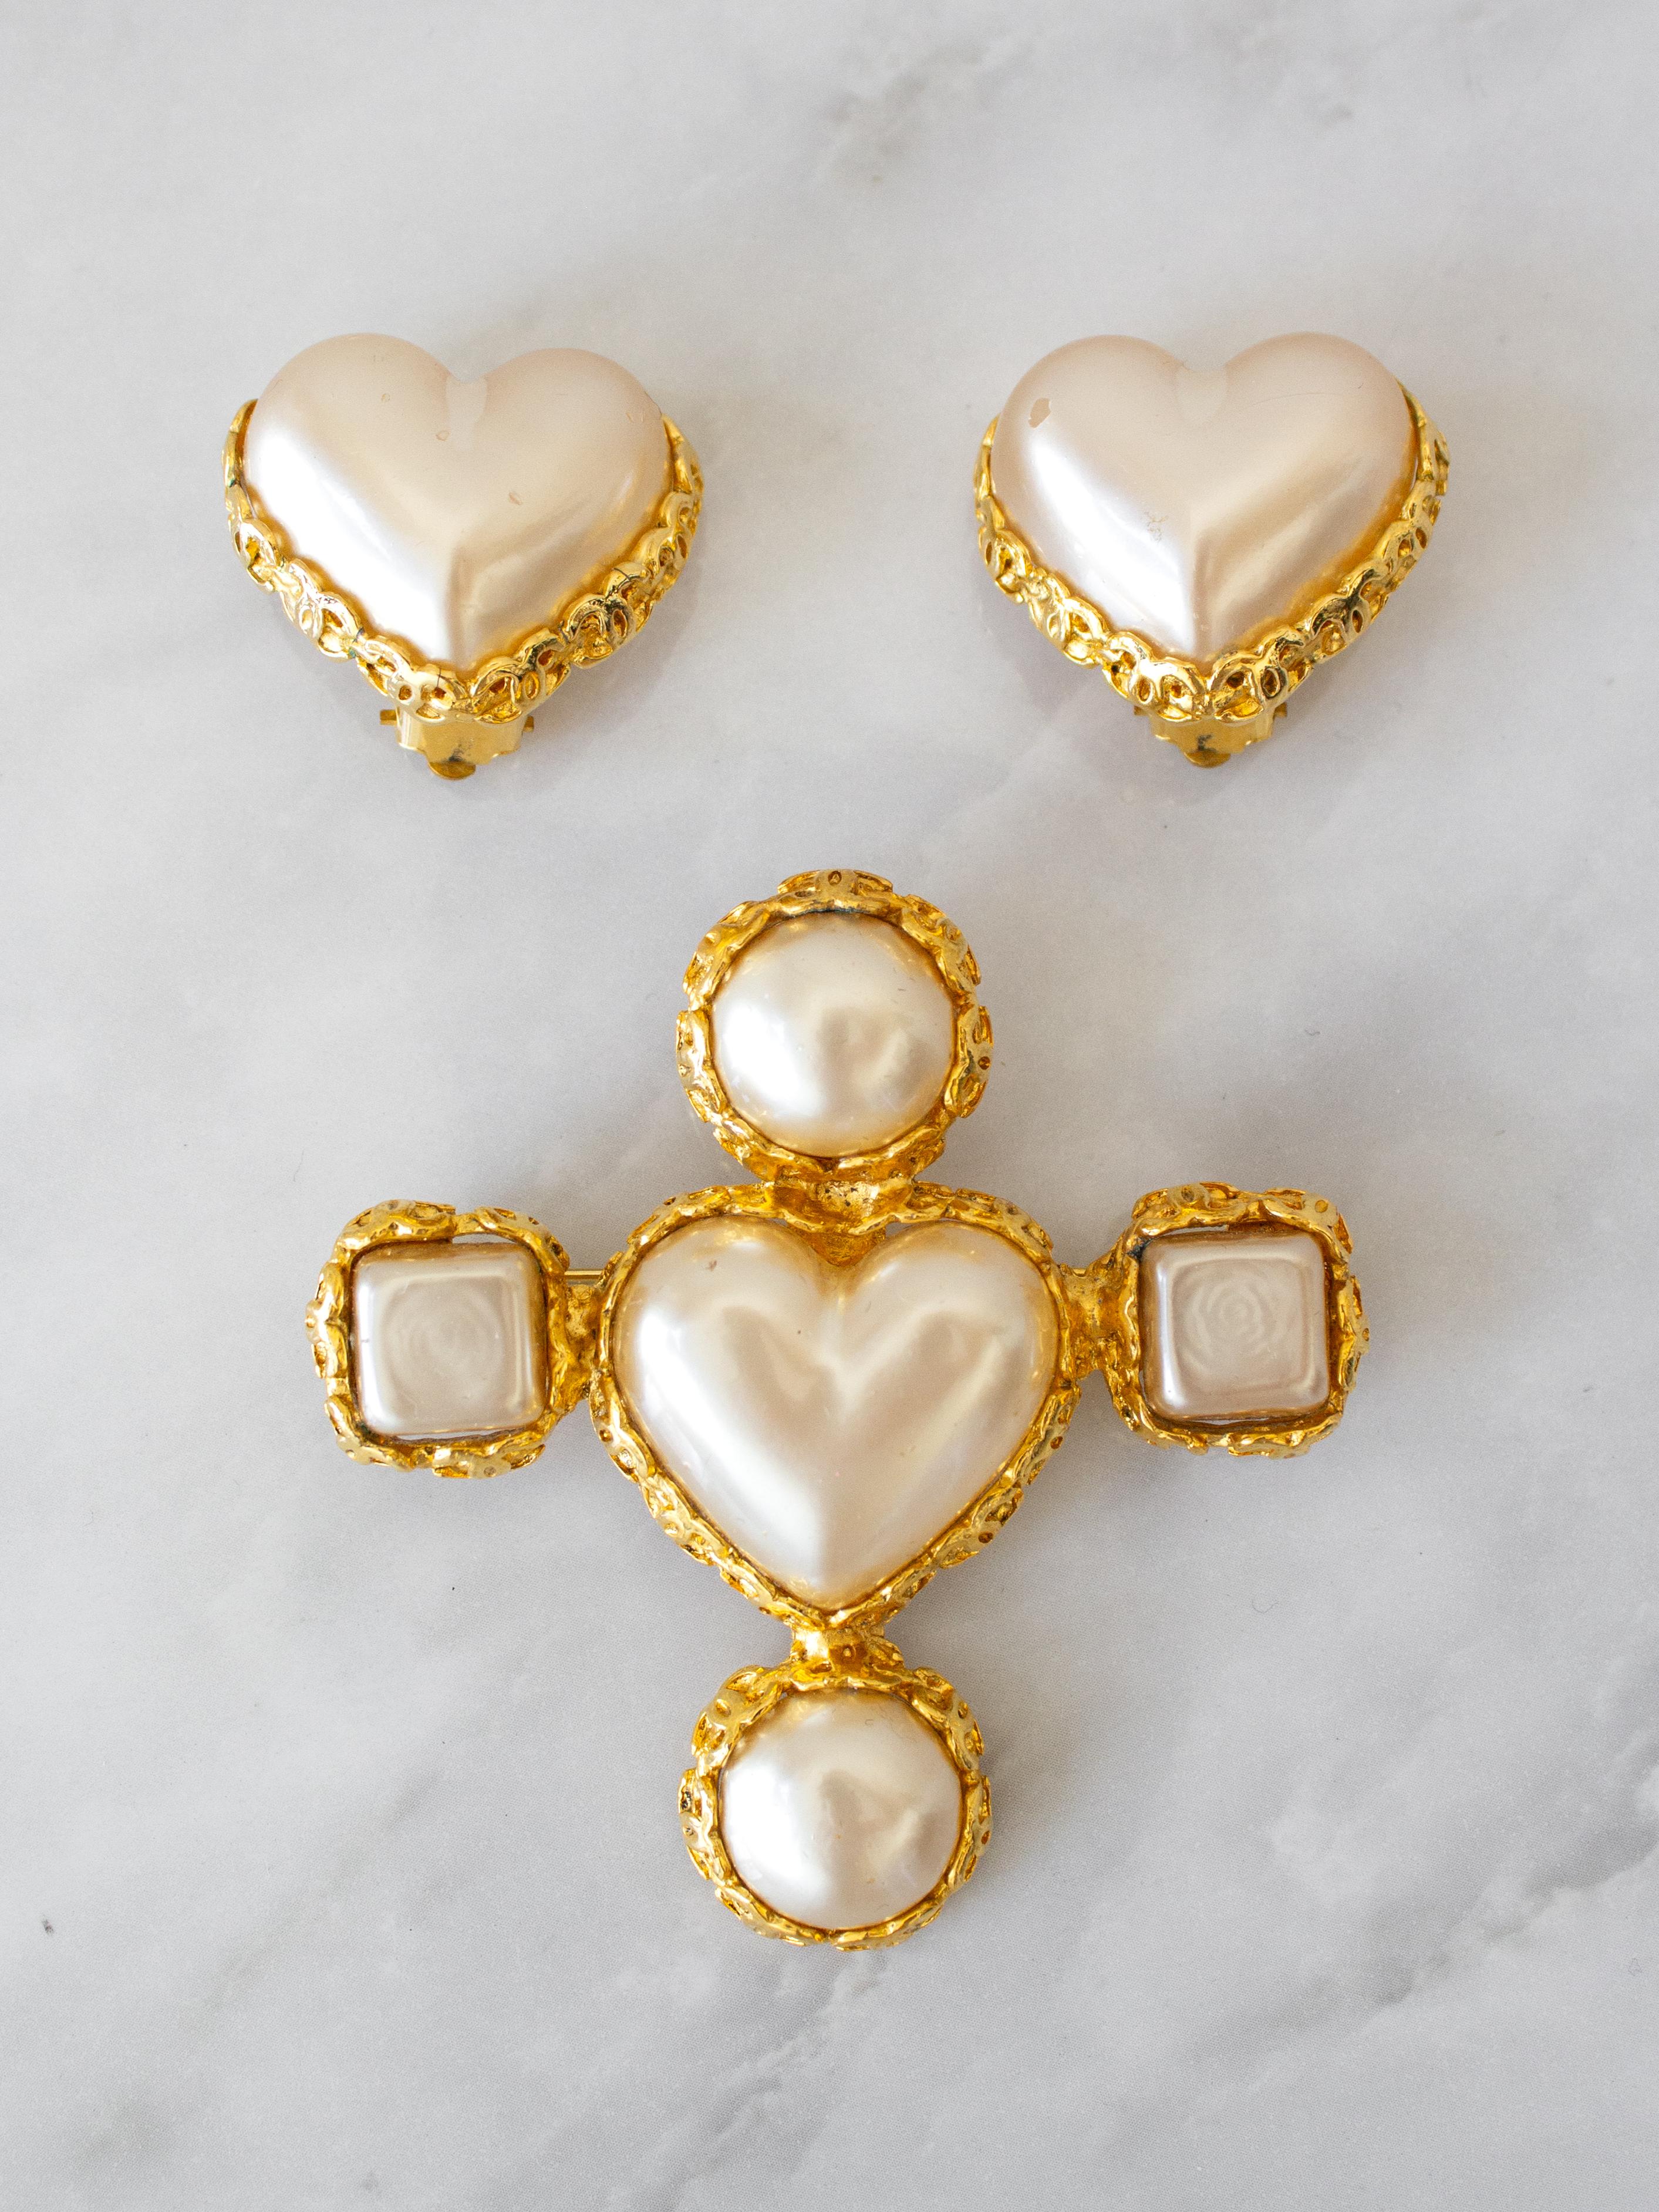 Introducing a truly exceptional find: the Chanel Spring/Summer 1992 Collection 28 earrings and brooch set. Crafted with meticulous detail, this exquisite ensemble features faux pearls adorned with gold-plated metal CC trims. 
Designed by the